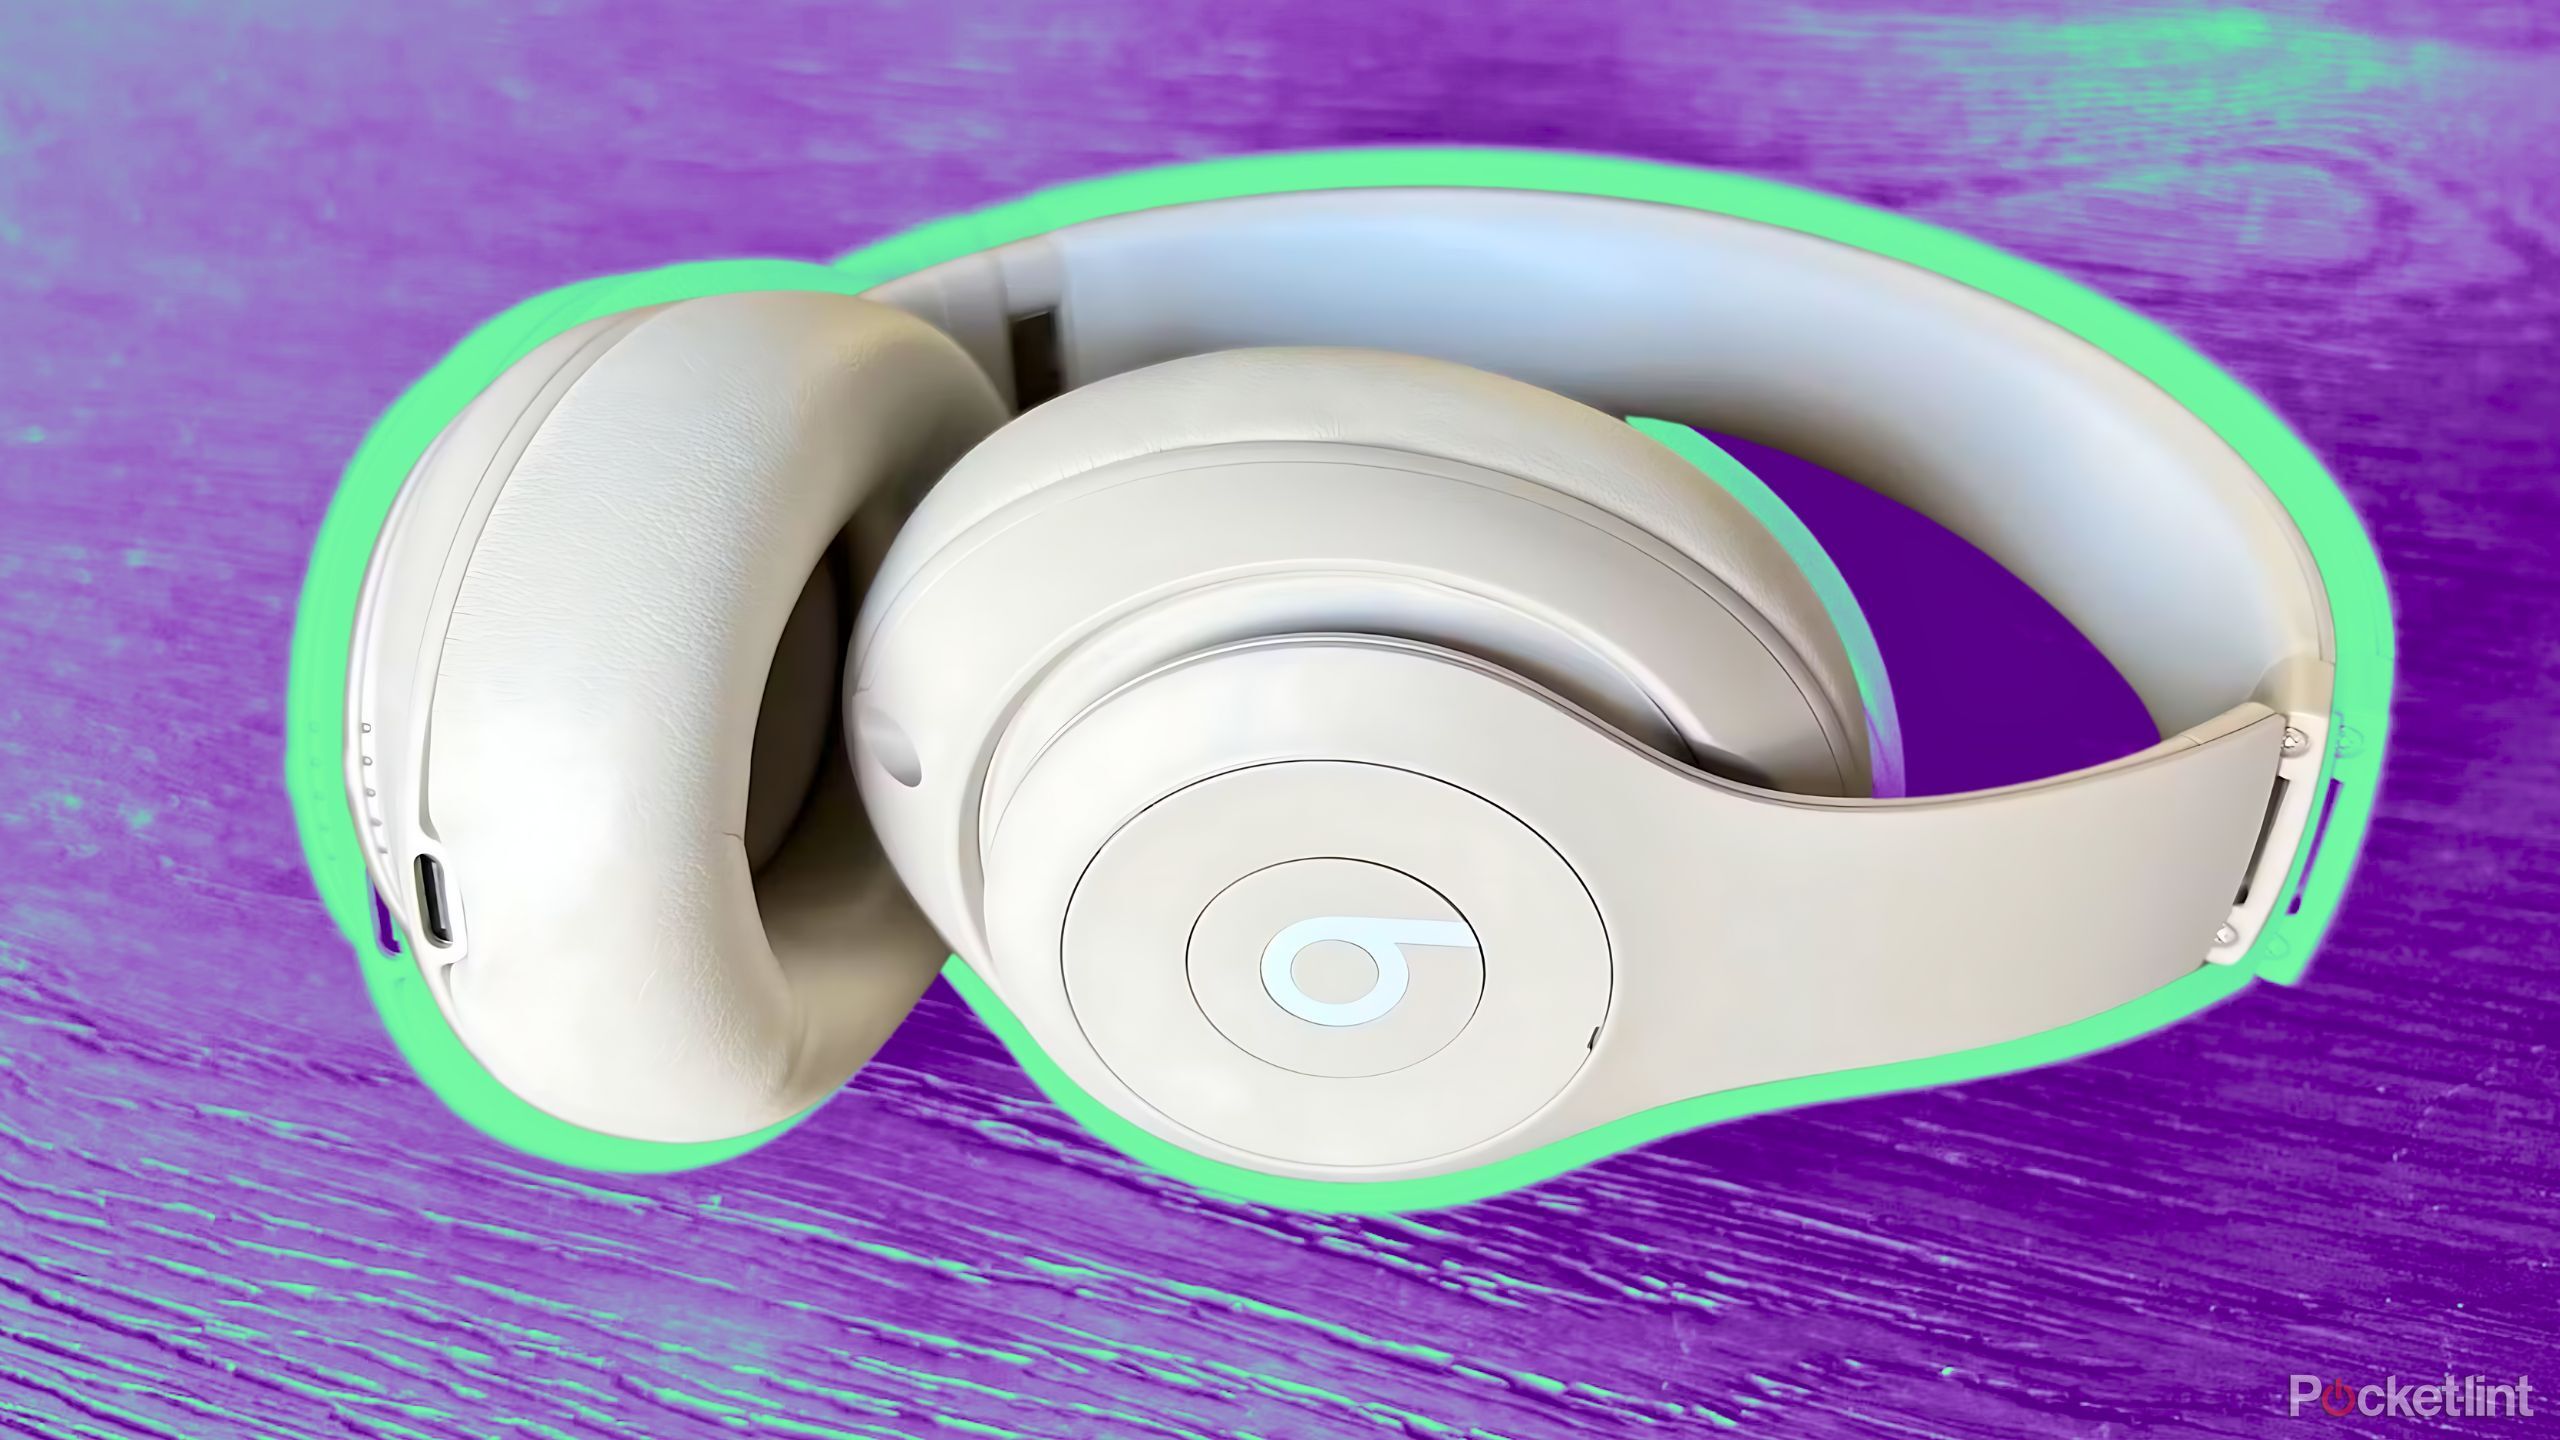 6 reasons to buy Beats Studio Pro over AirPods Max